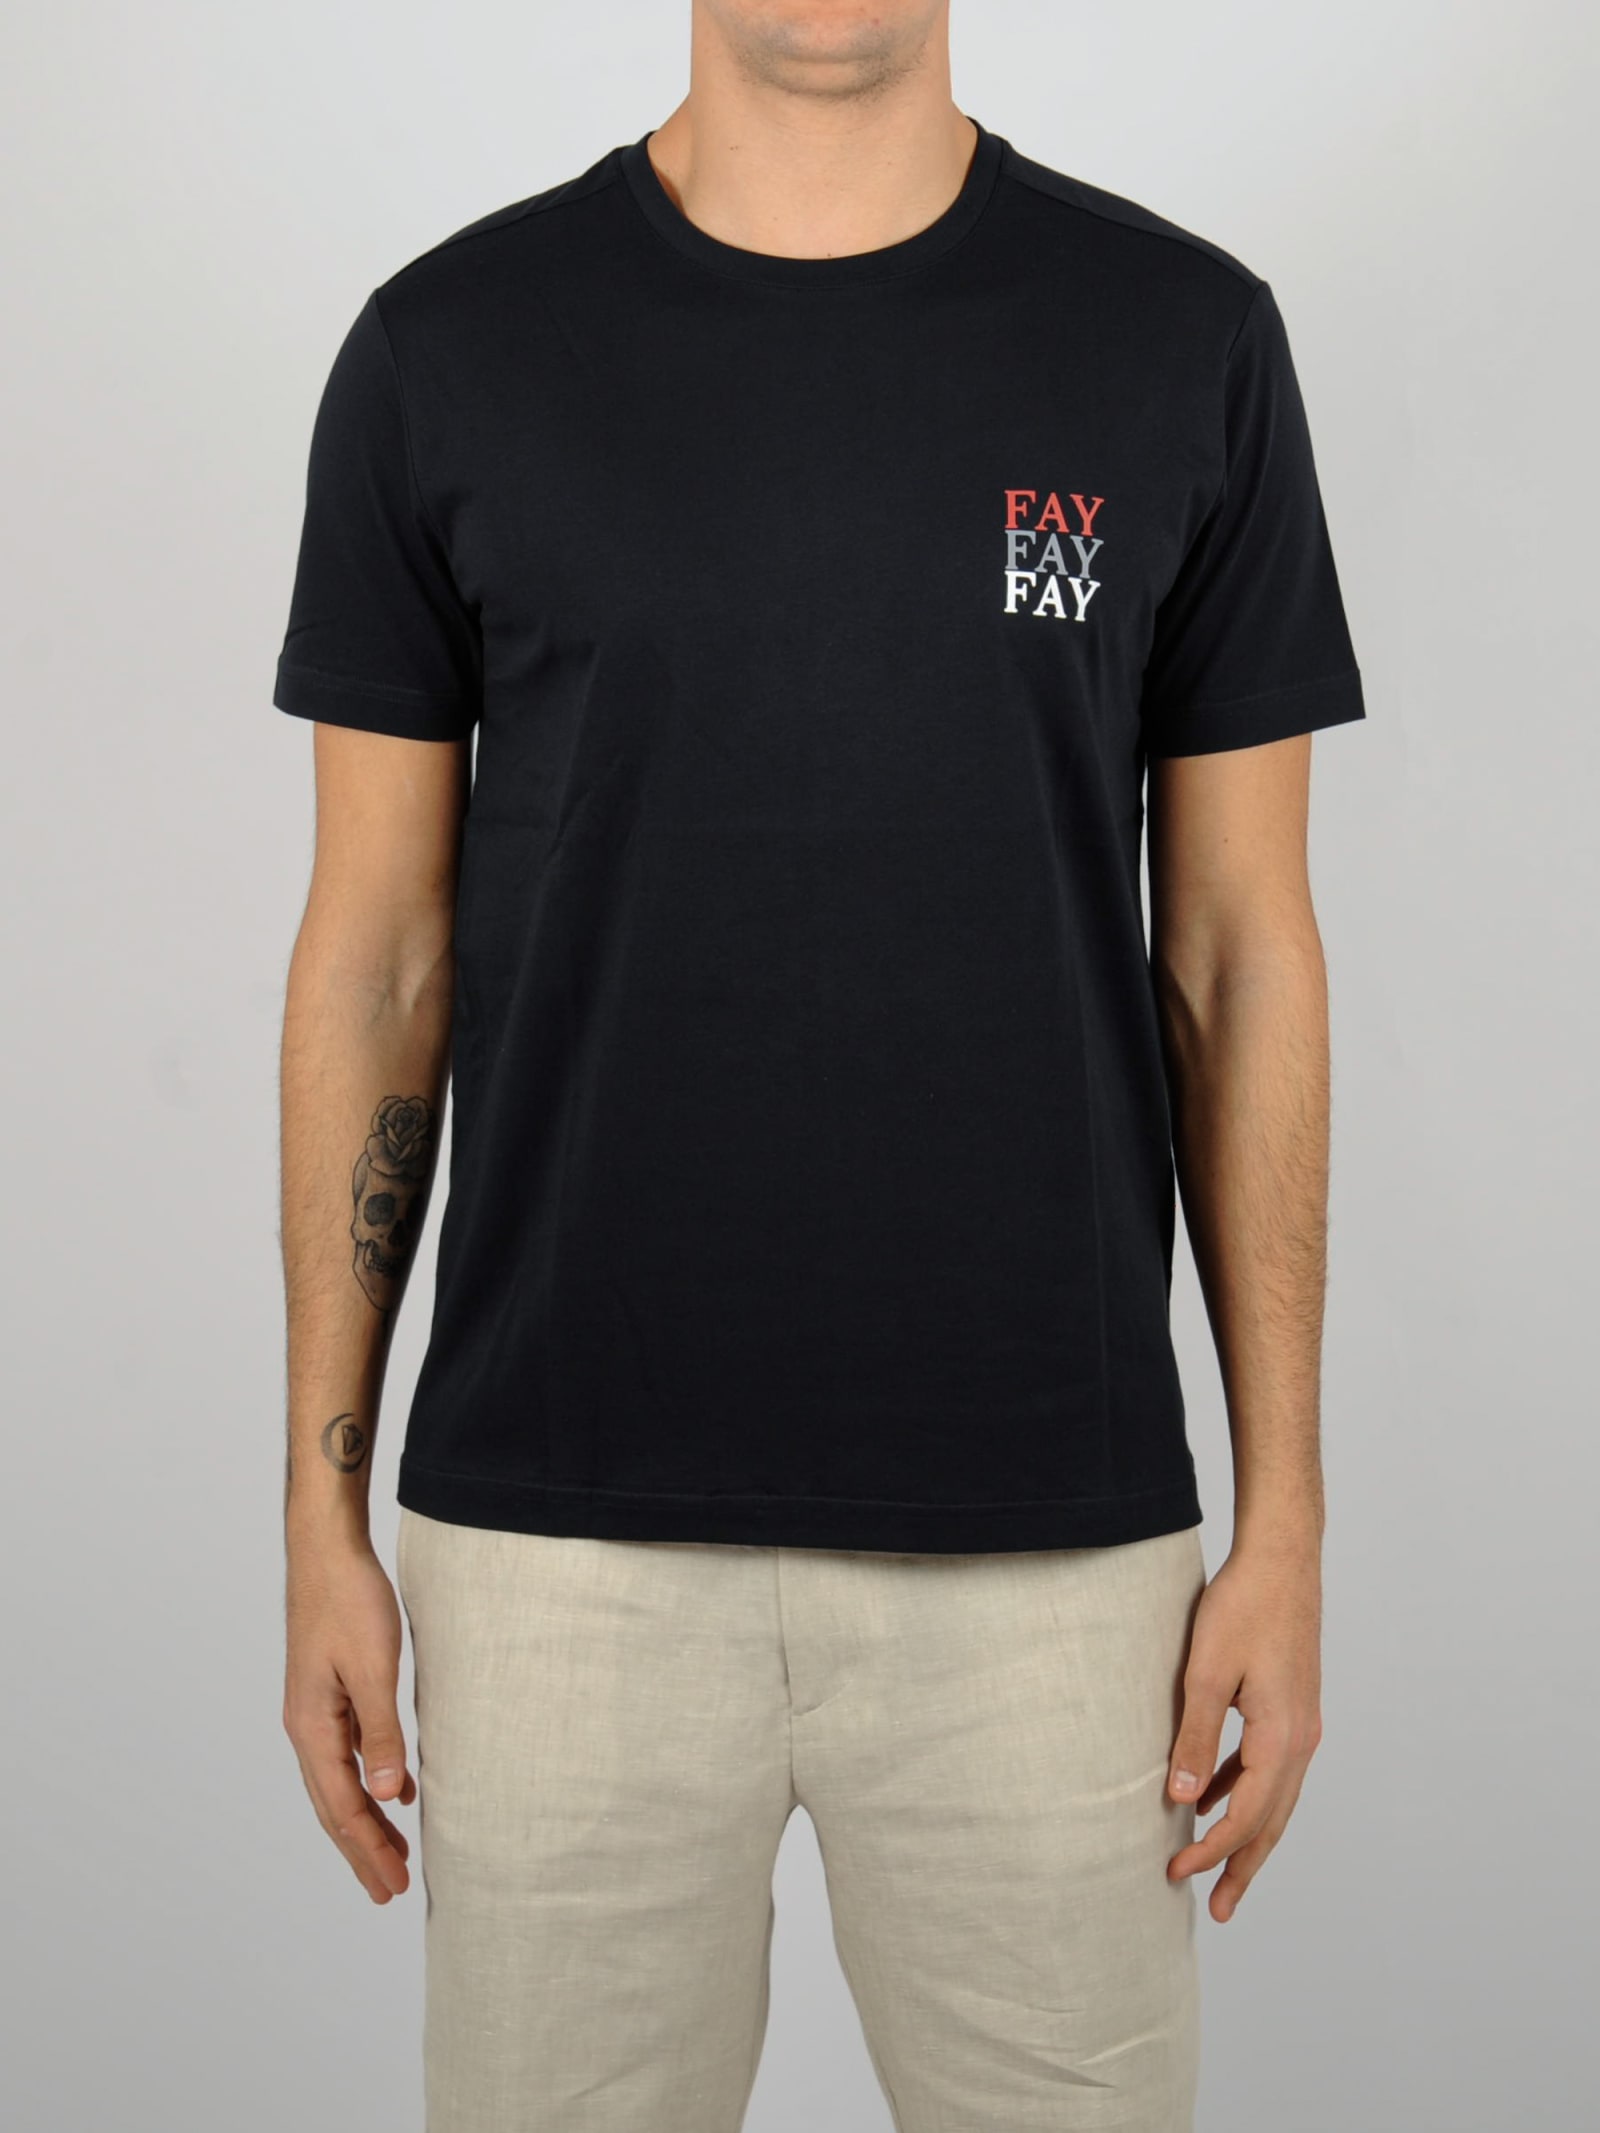 T-shirt Stampa 3fay Sul Petto T-shirt